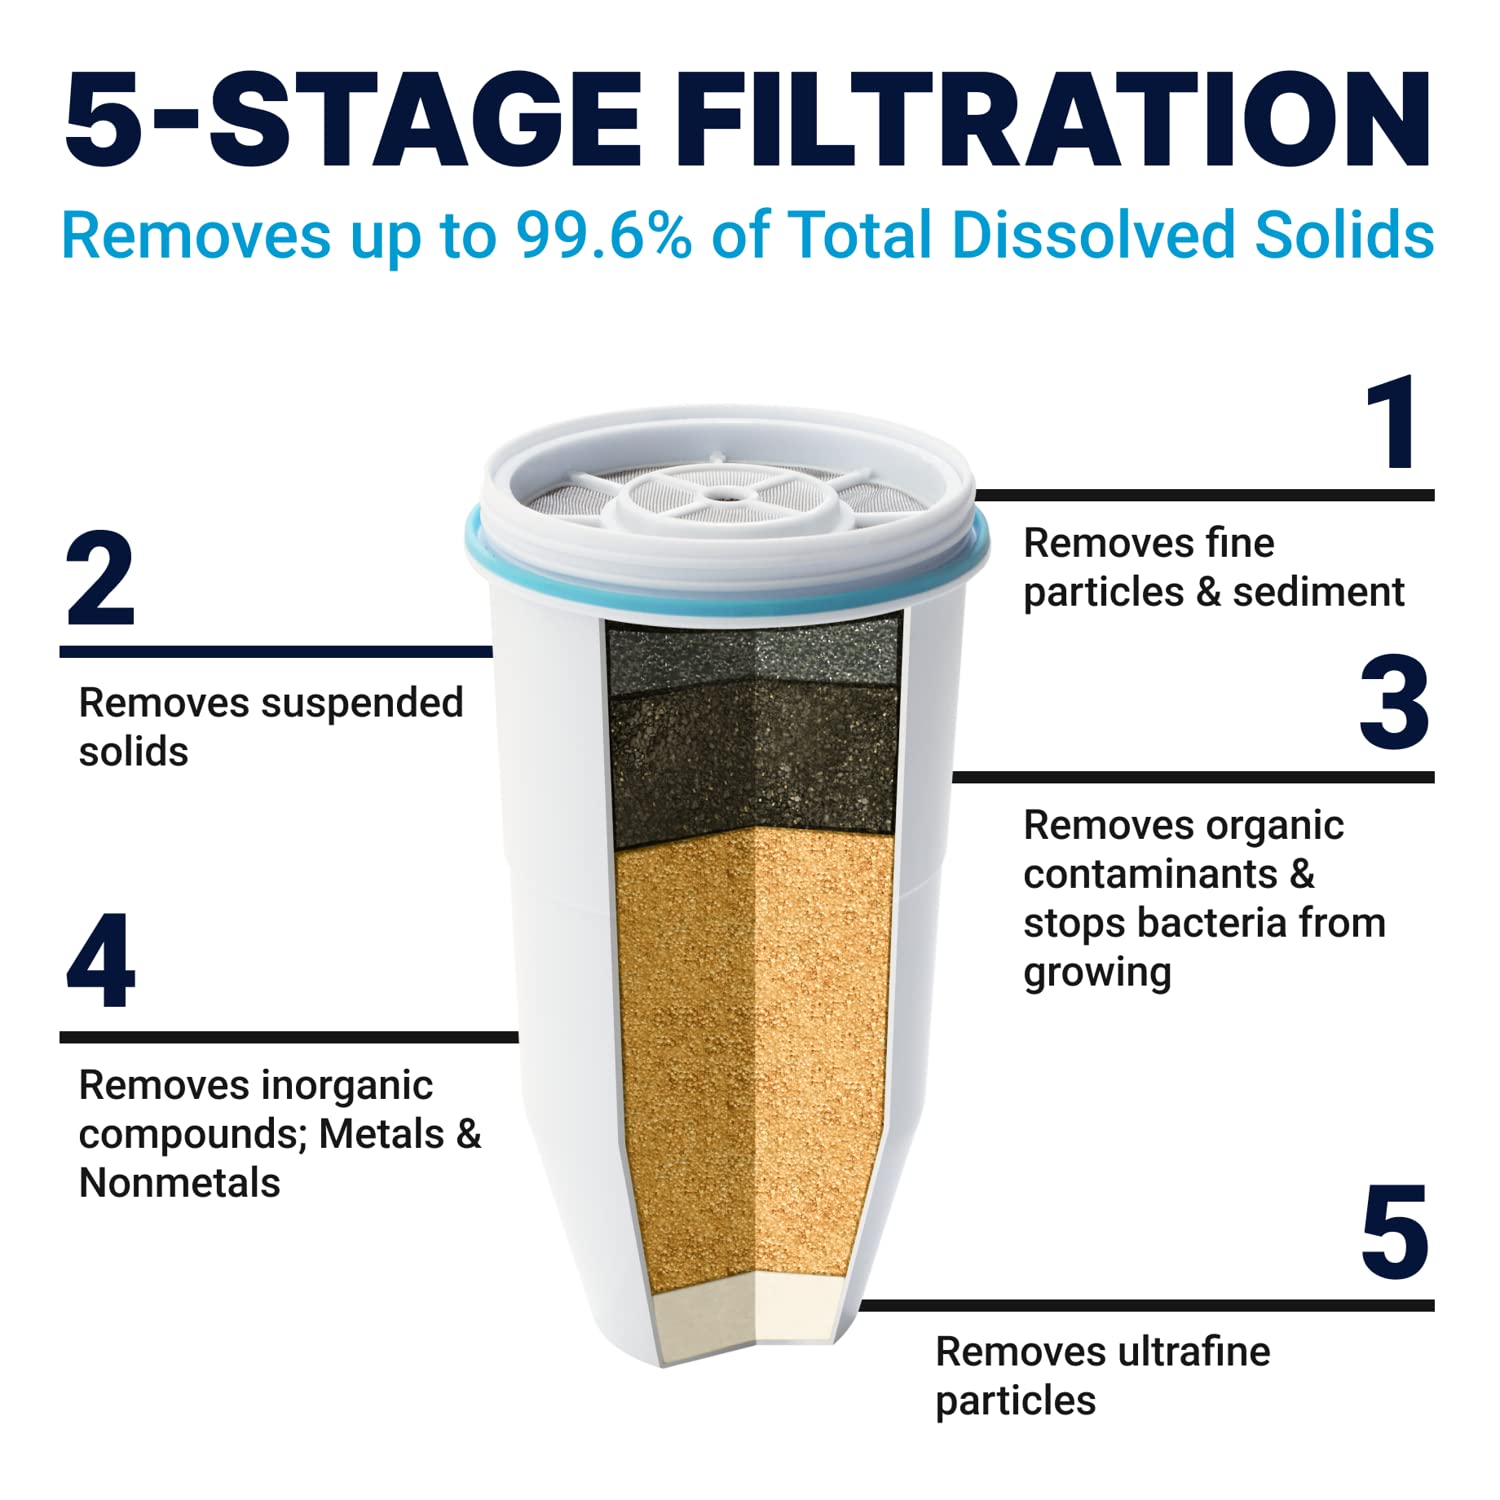 ZeroWater Official Replacement Filter - 5-Stage Filter Replacement 0 TDS for Improved Tap Water Taste - System NSF Certified to Reduce Lead, Chromium, and PFOA/PFOS, 2-Pack